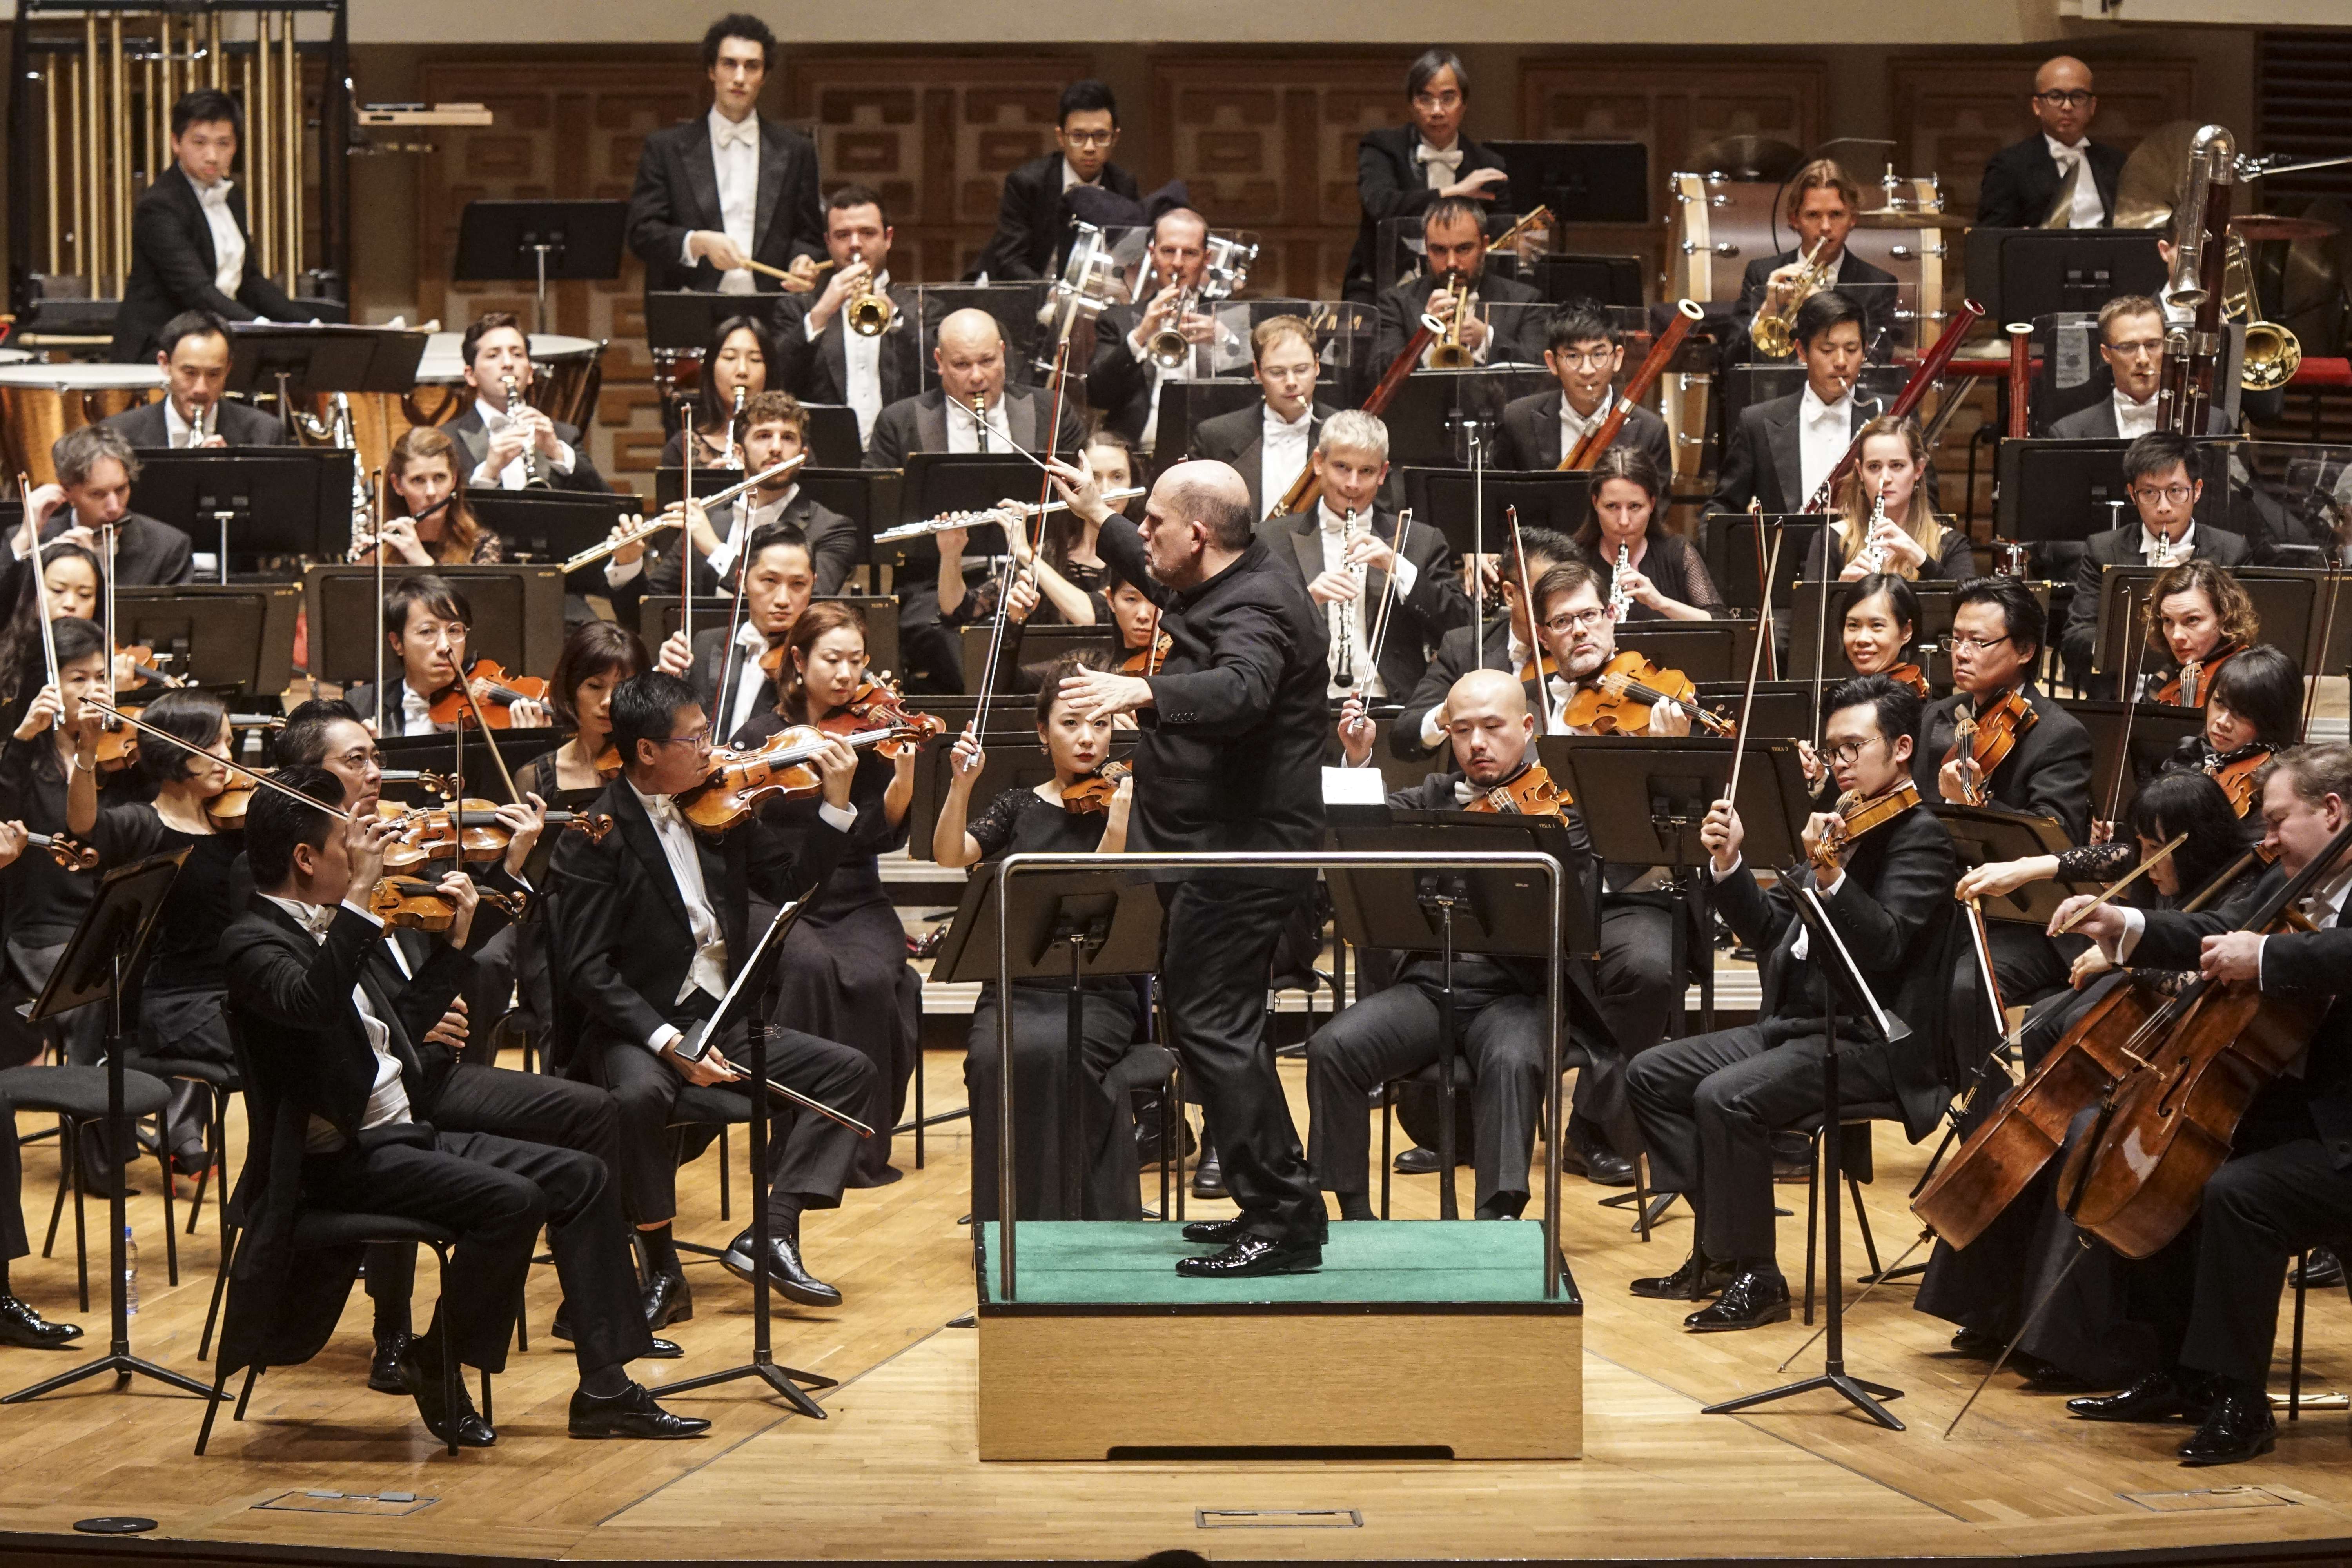 Jaap van Zweden conducts the Hong Kong Philharmonic in a performance of Mahler’s Symphony No. 3. Photo: Courtesy of Hong Kong Philharmonic Orchestra